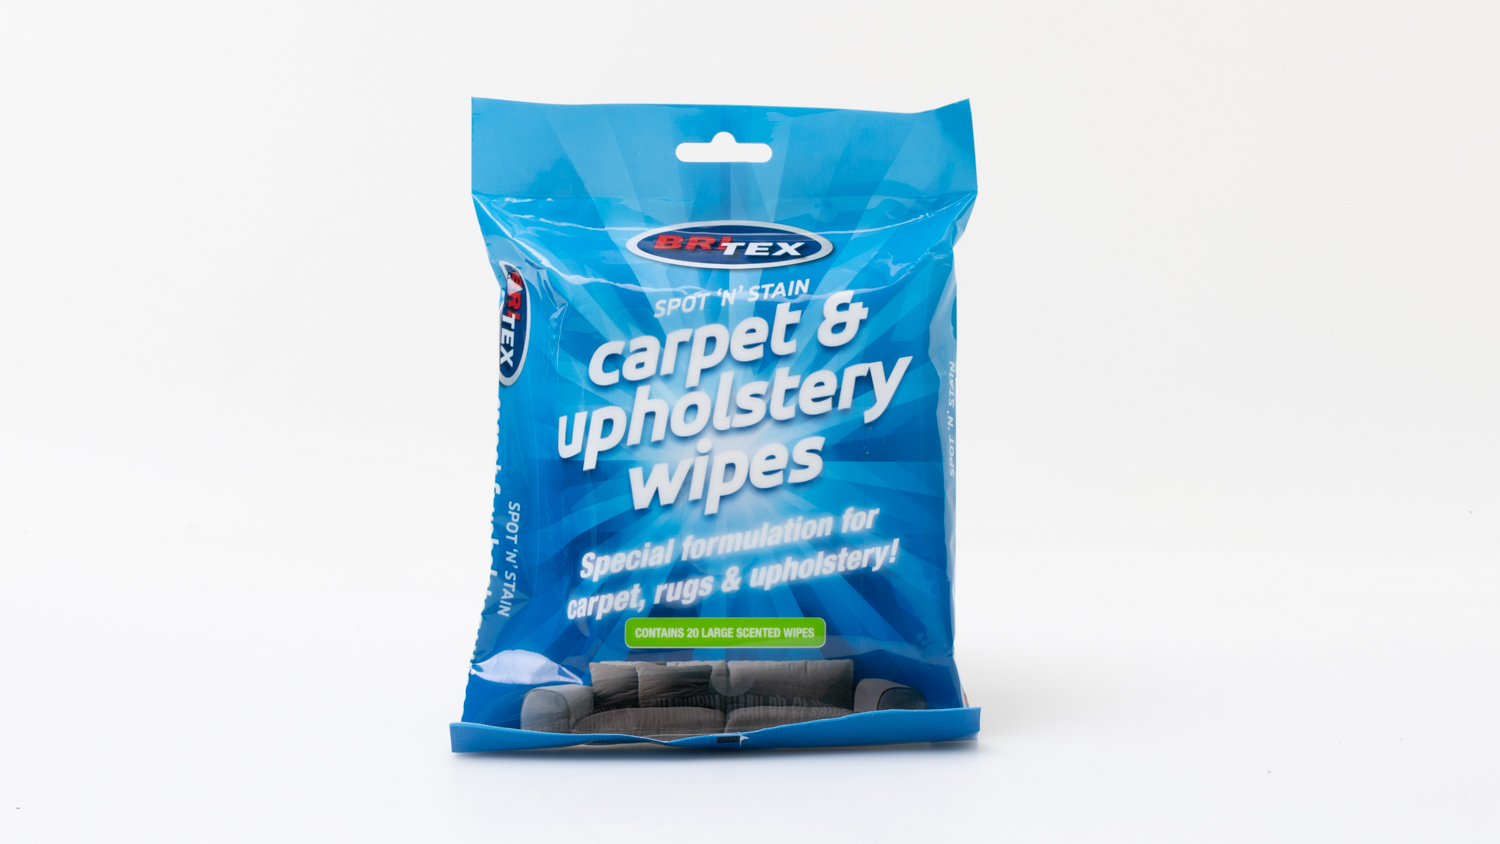 Britex Spot 'n' Stain Carpet & Upholstery Wipes carousel image